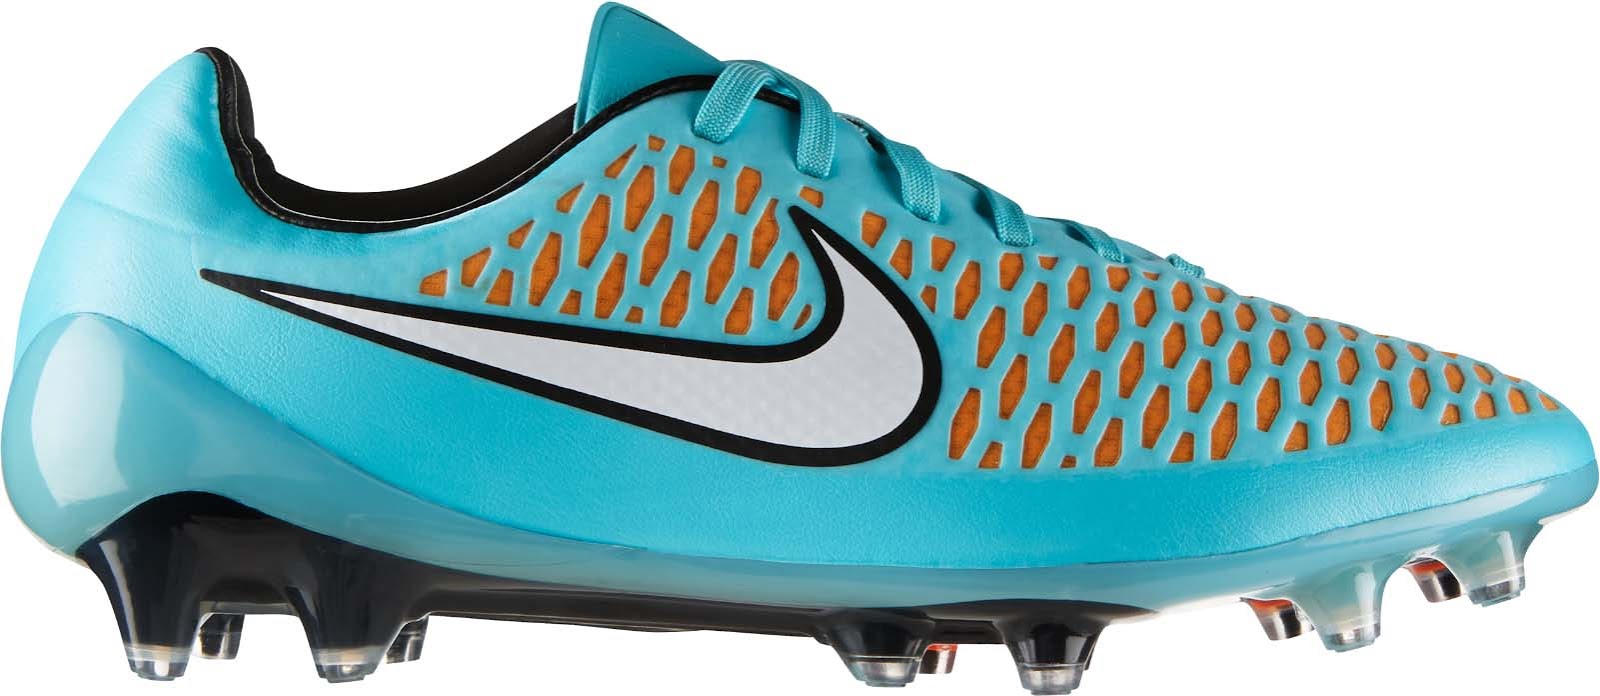 Nike Magista Opus 2 Reviews and Price Comparisons